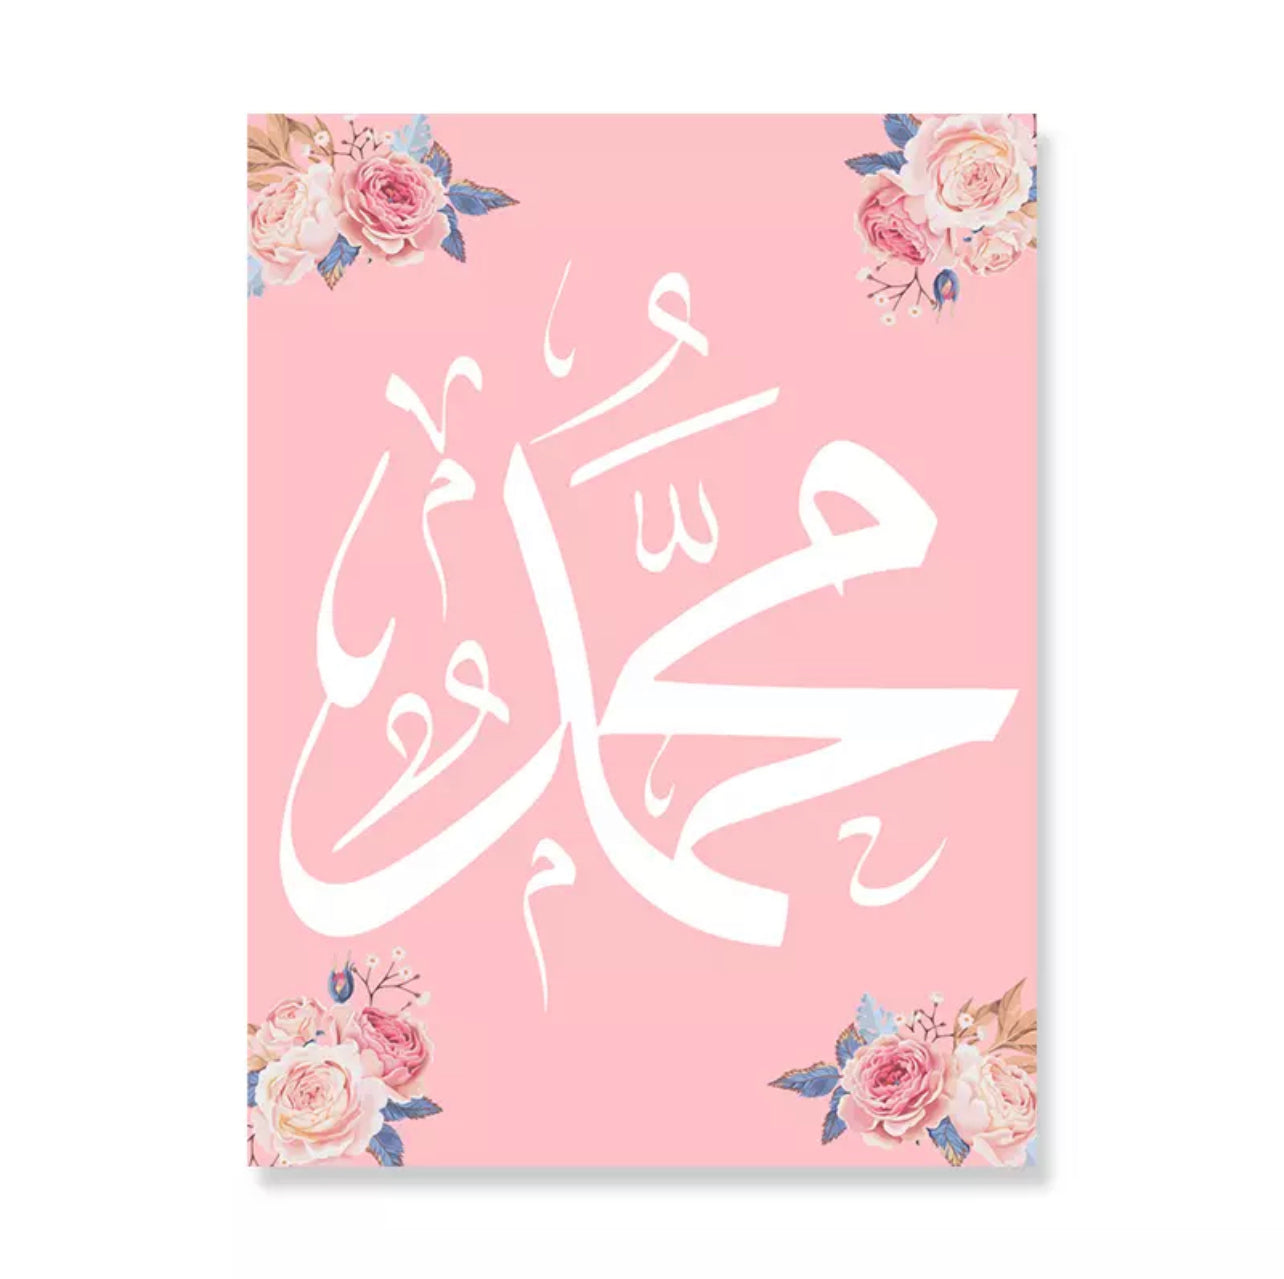 Pink With Cornered Floral Design And White Islamic Calligraphy